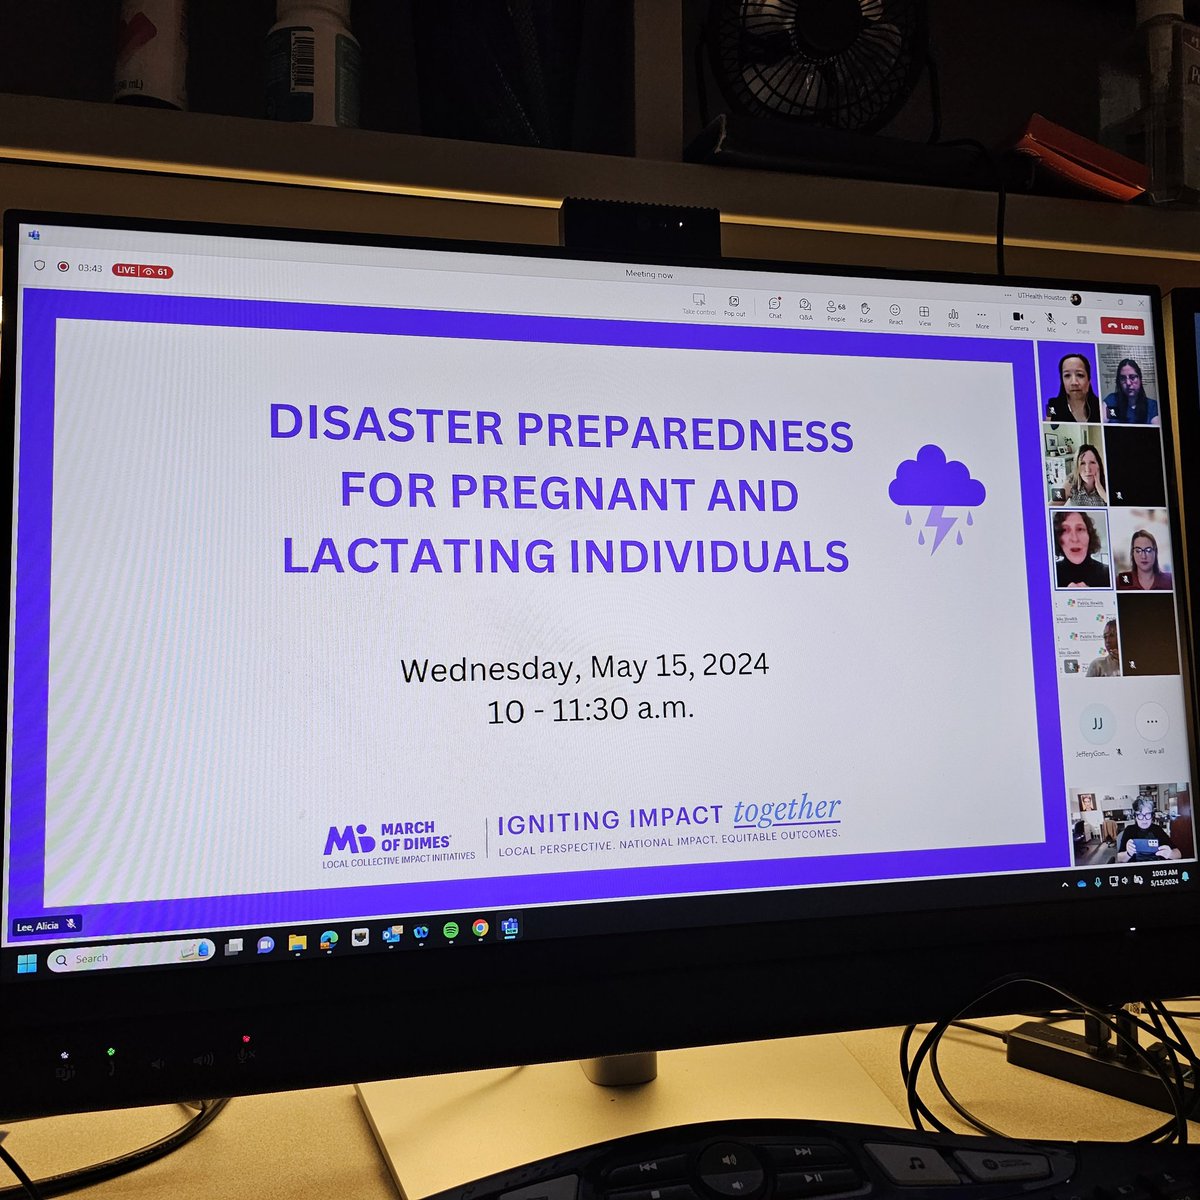 Speaking today at #CHW webinar on #disaster #preparedness for #pregnant individuals 🤰🤱 @marchofdimeshou @TEPHI_Texas @UTHealthSPH @airallianceHOU #mom #MCH #Resilience #publichealth #healthequity